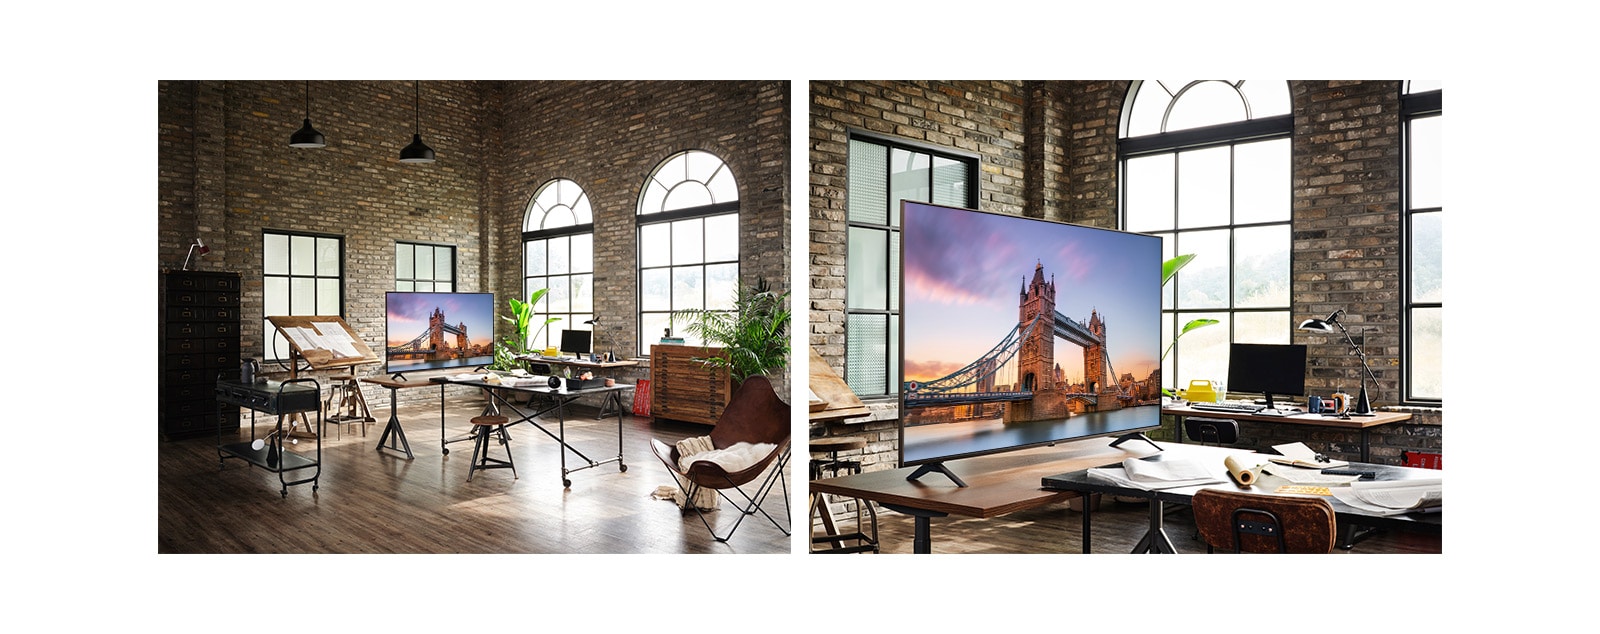 A television showing a picture of London Bridge is found in an old workshop. A close-up of a television showing an image of London Bridge is on a table in an old workshop.